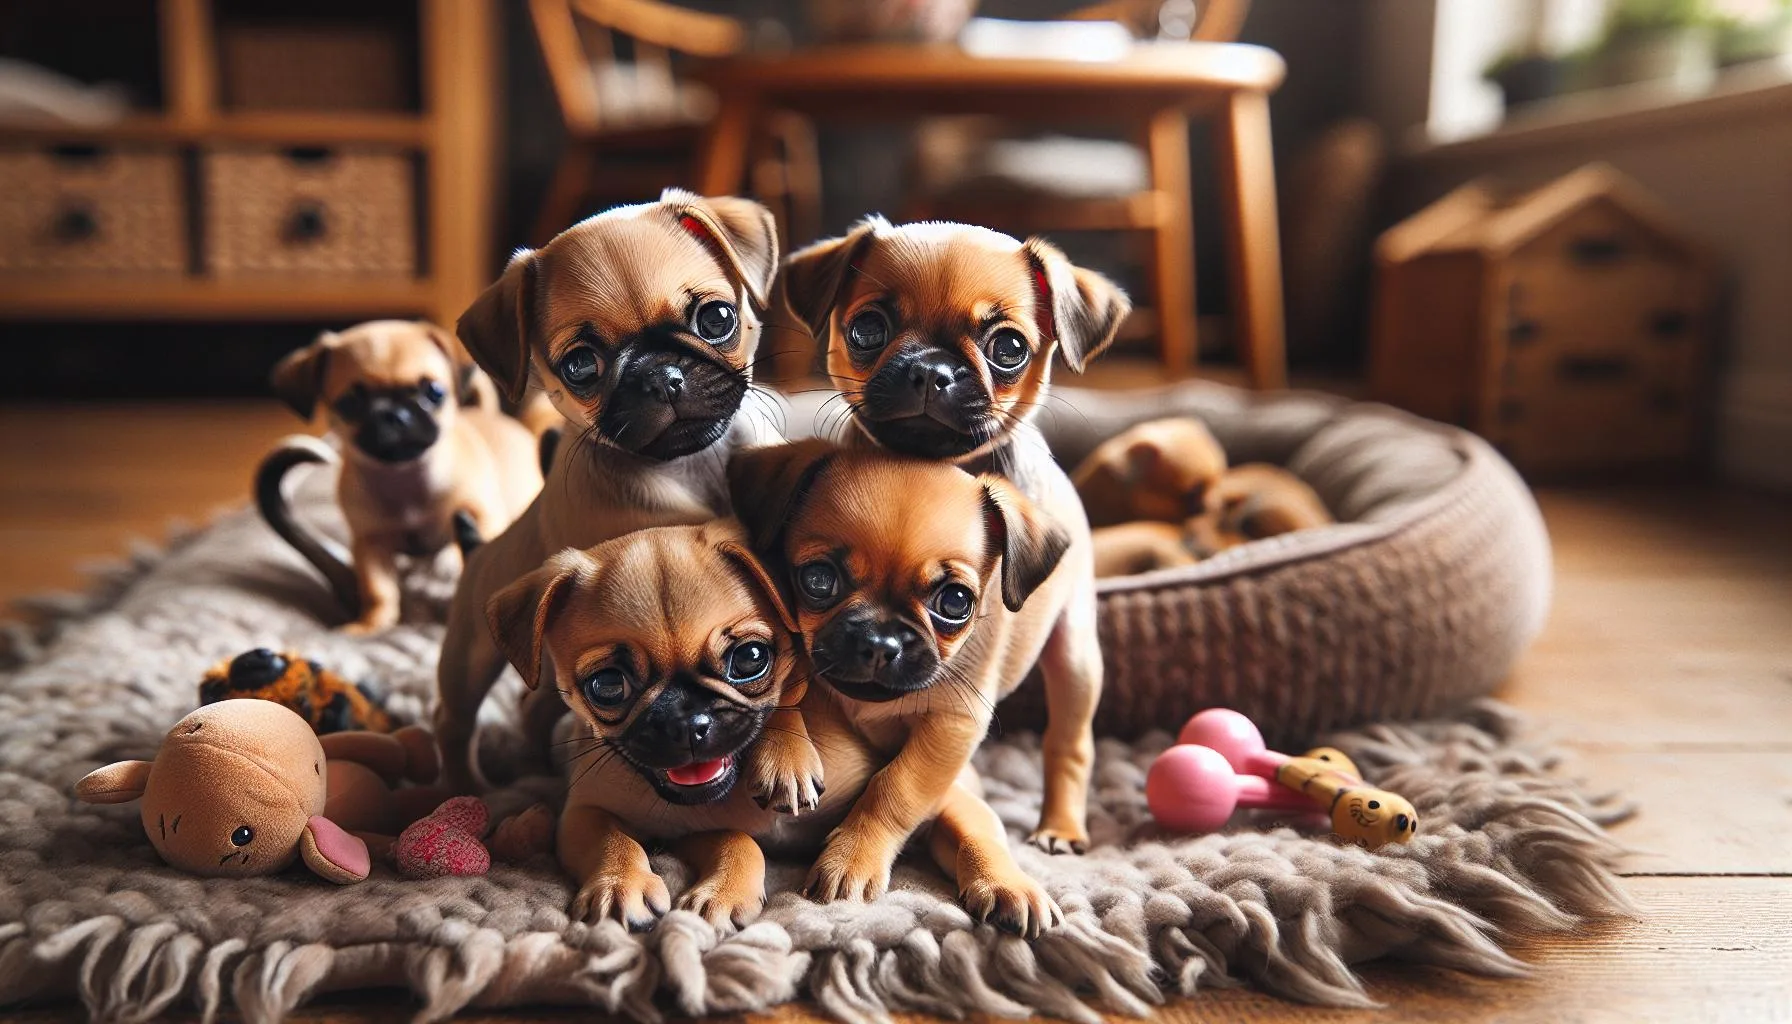 Pug and Chihuahua Mix Puppies: Buy Your Pup Now!